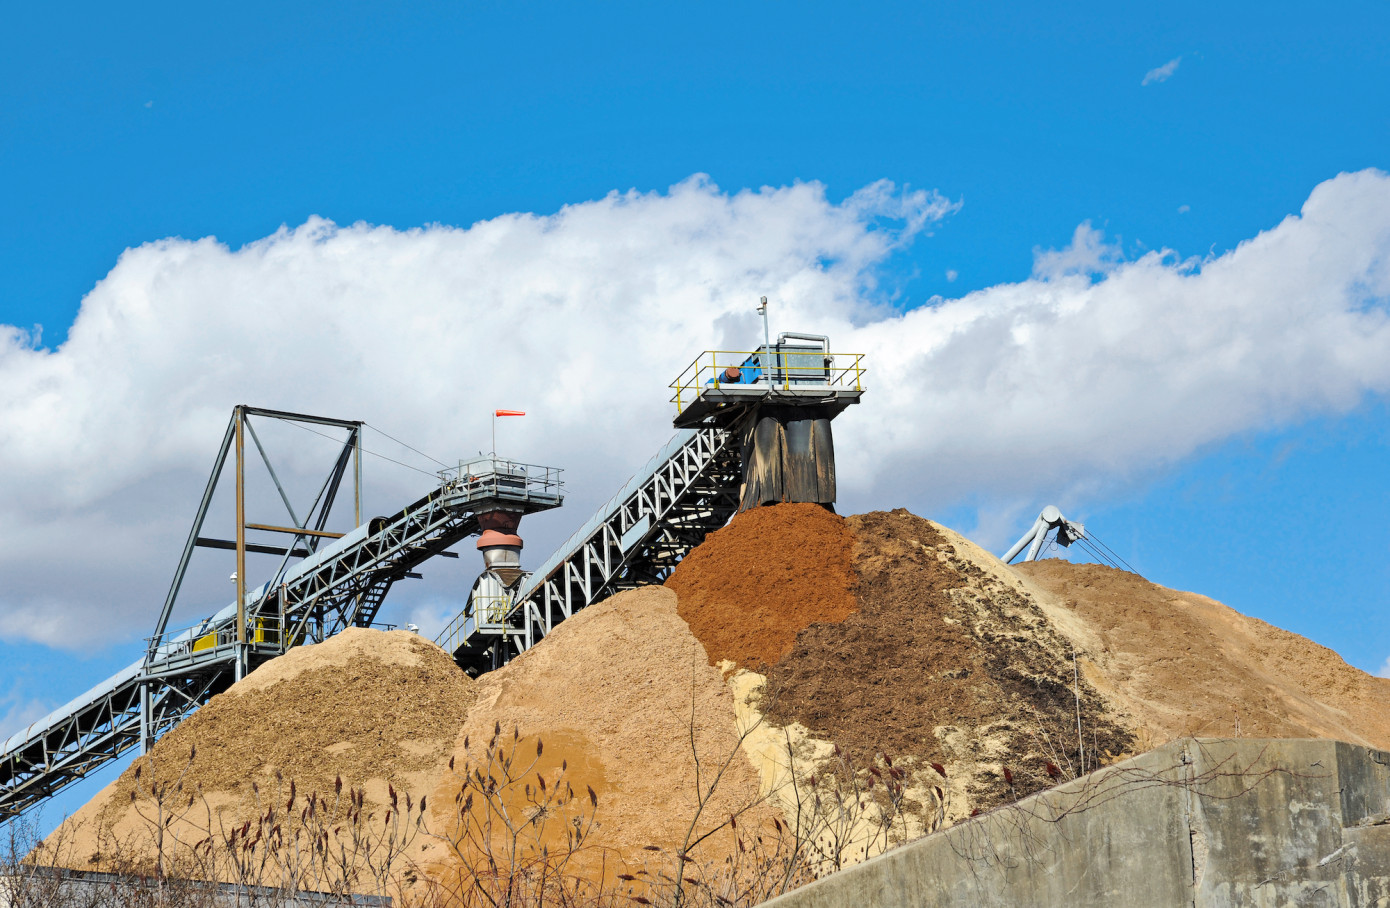 In April, price for wood chips exported from Chile gains 2%